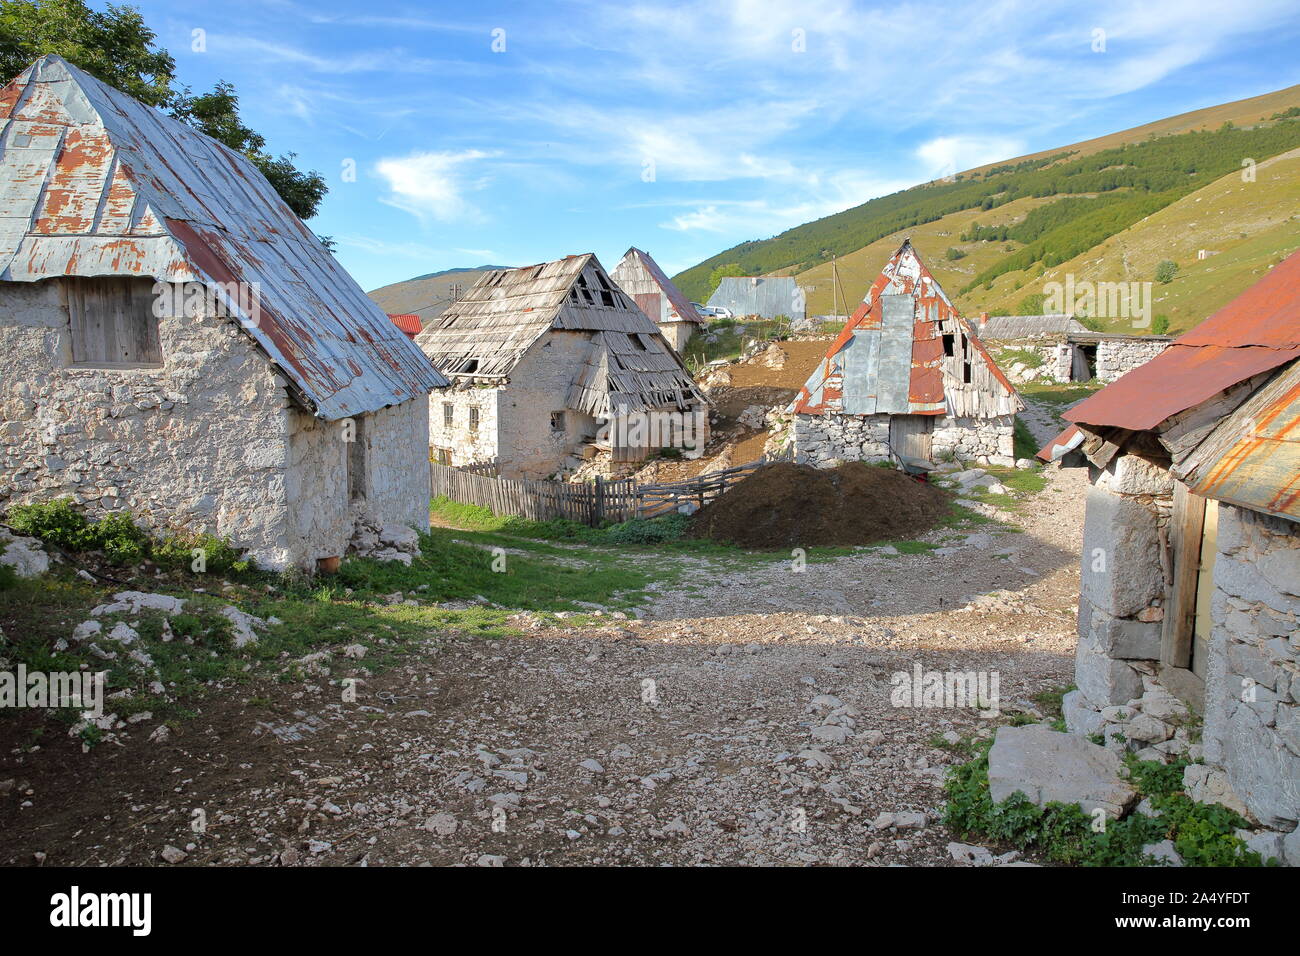 Traditional houses in Lukomir village, Bosnia's highest village at 1469 meters and the most remote in the entire country, Bosnia and Herzegovina Stock Photo